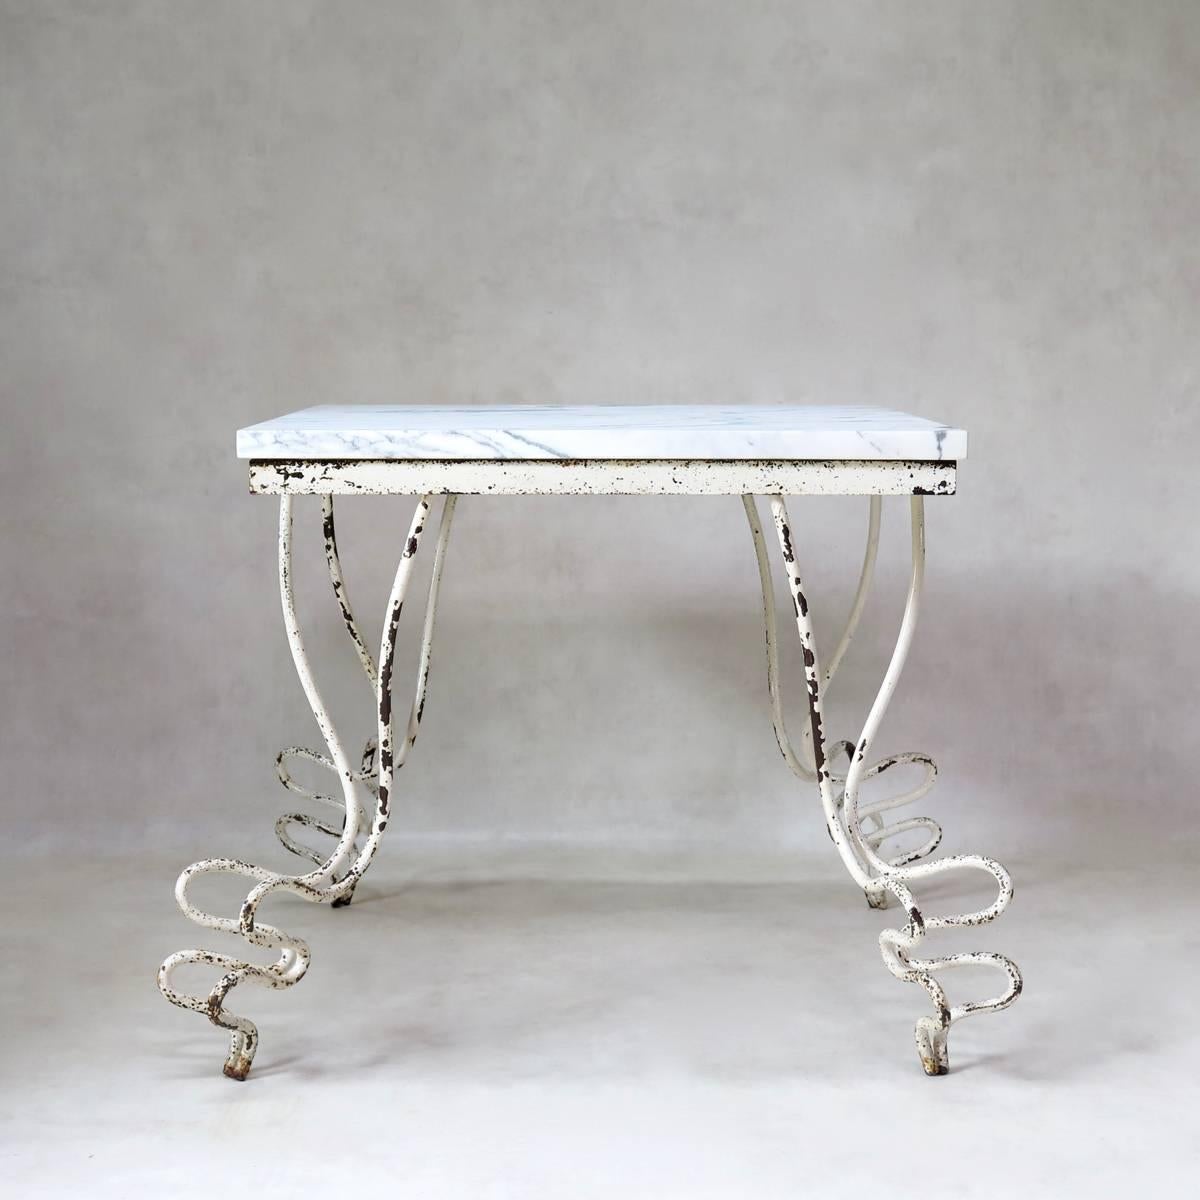 Rather wonderful and unique French Mid-Century square centre or dining table, made of wrought-iron with striking legs, and a thick Carrara marble top. Original white paint.
Suitable for use indoors or out.